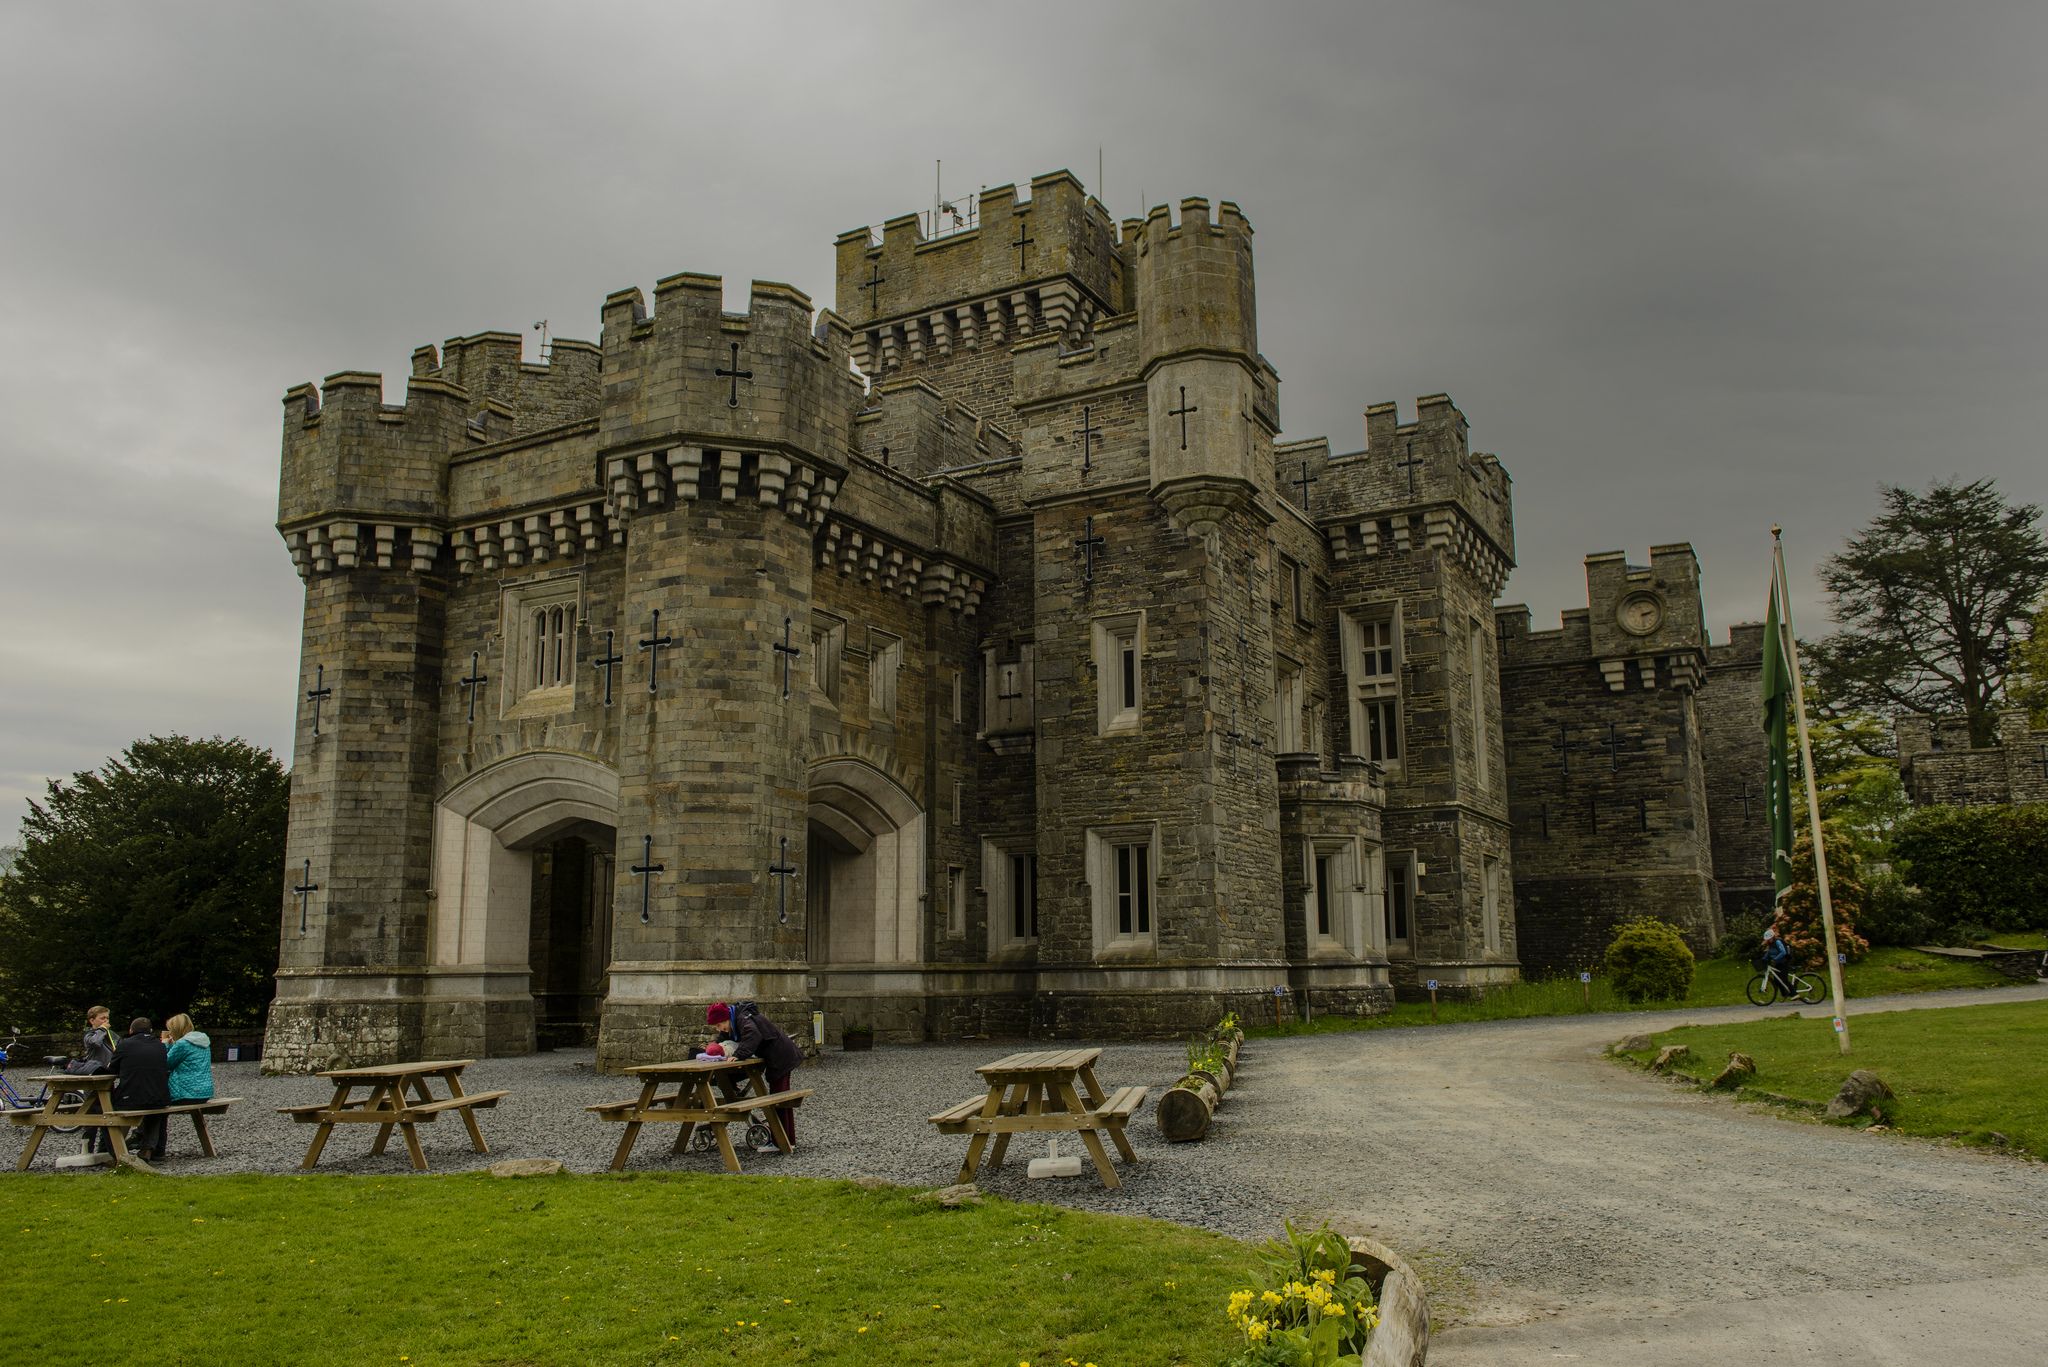 Wray Castle. Photo by: Son of Groucho